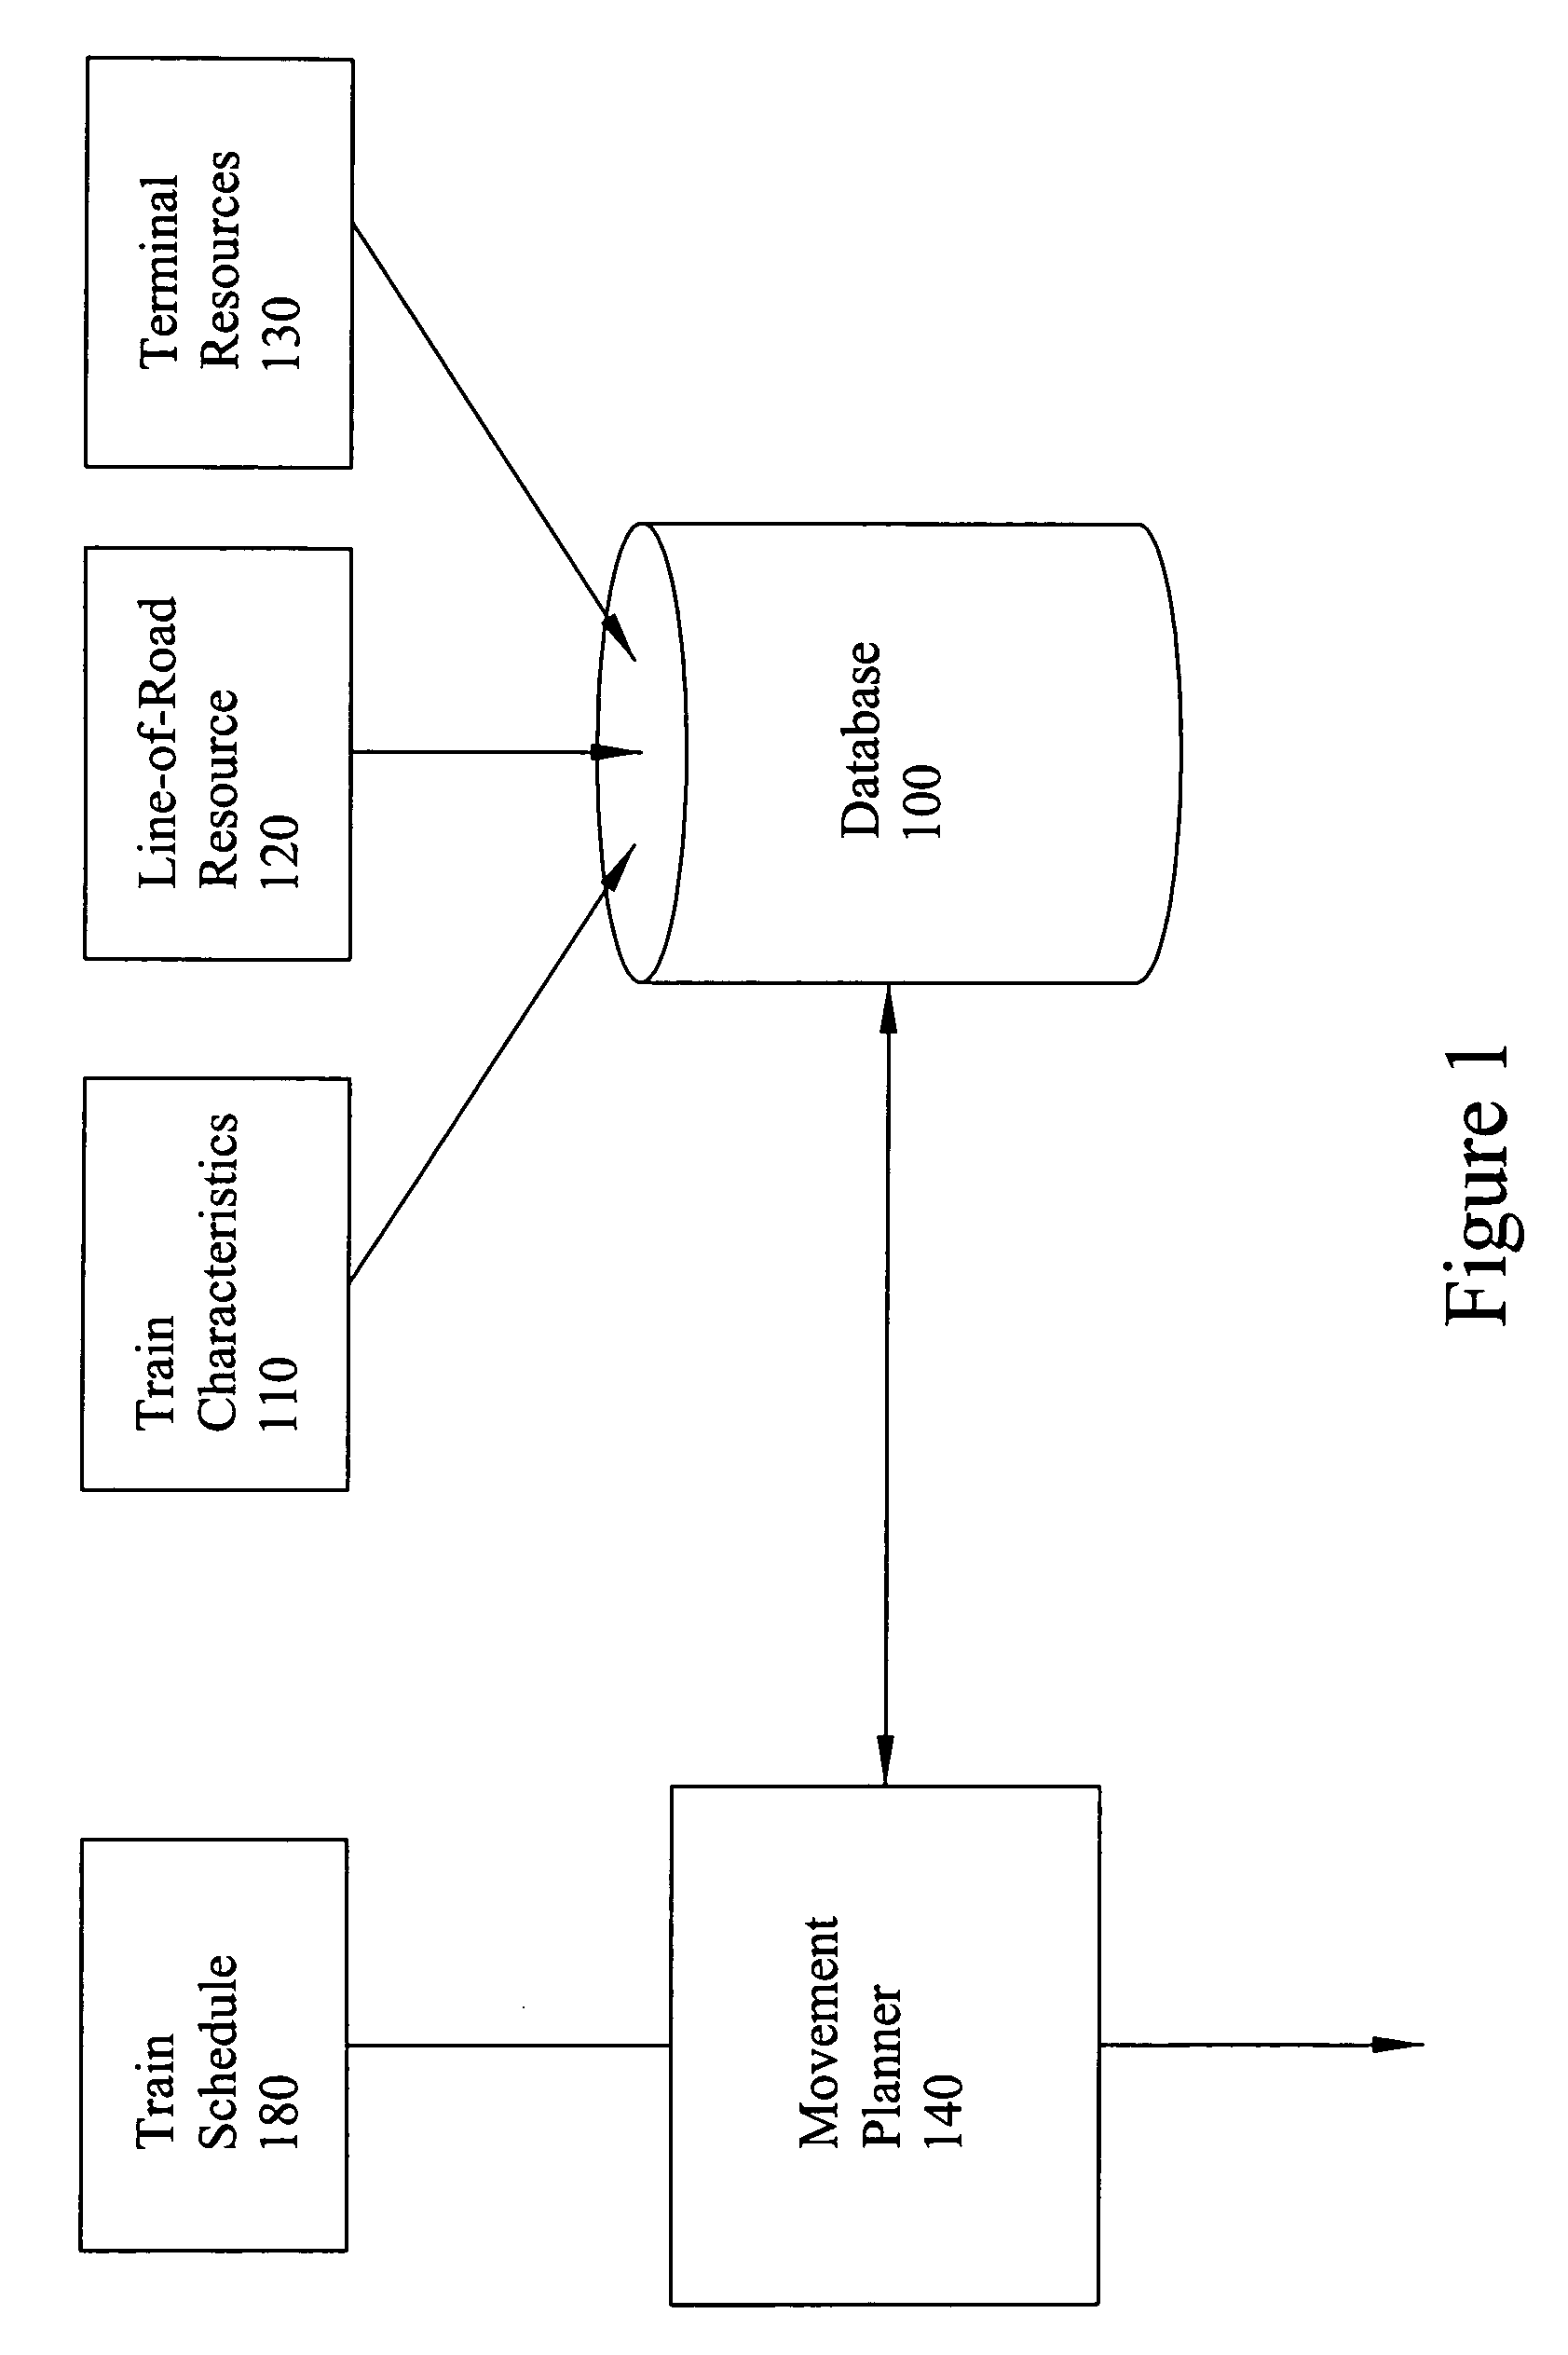 Method and apparatus for planning the movement of trains using dynamic analysis